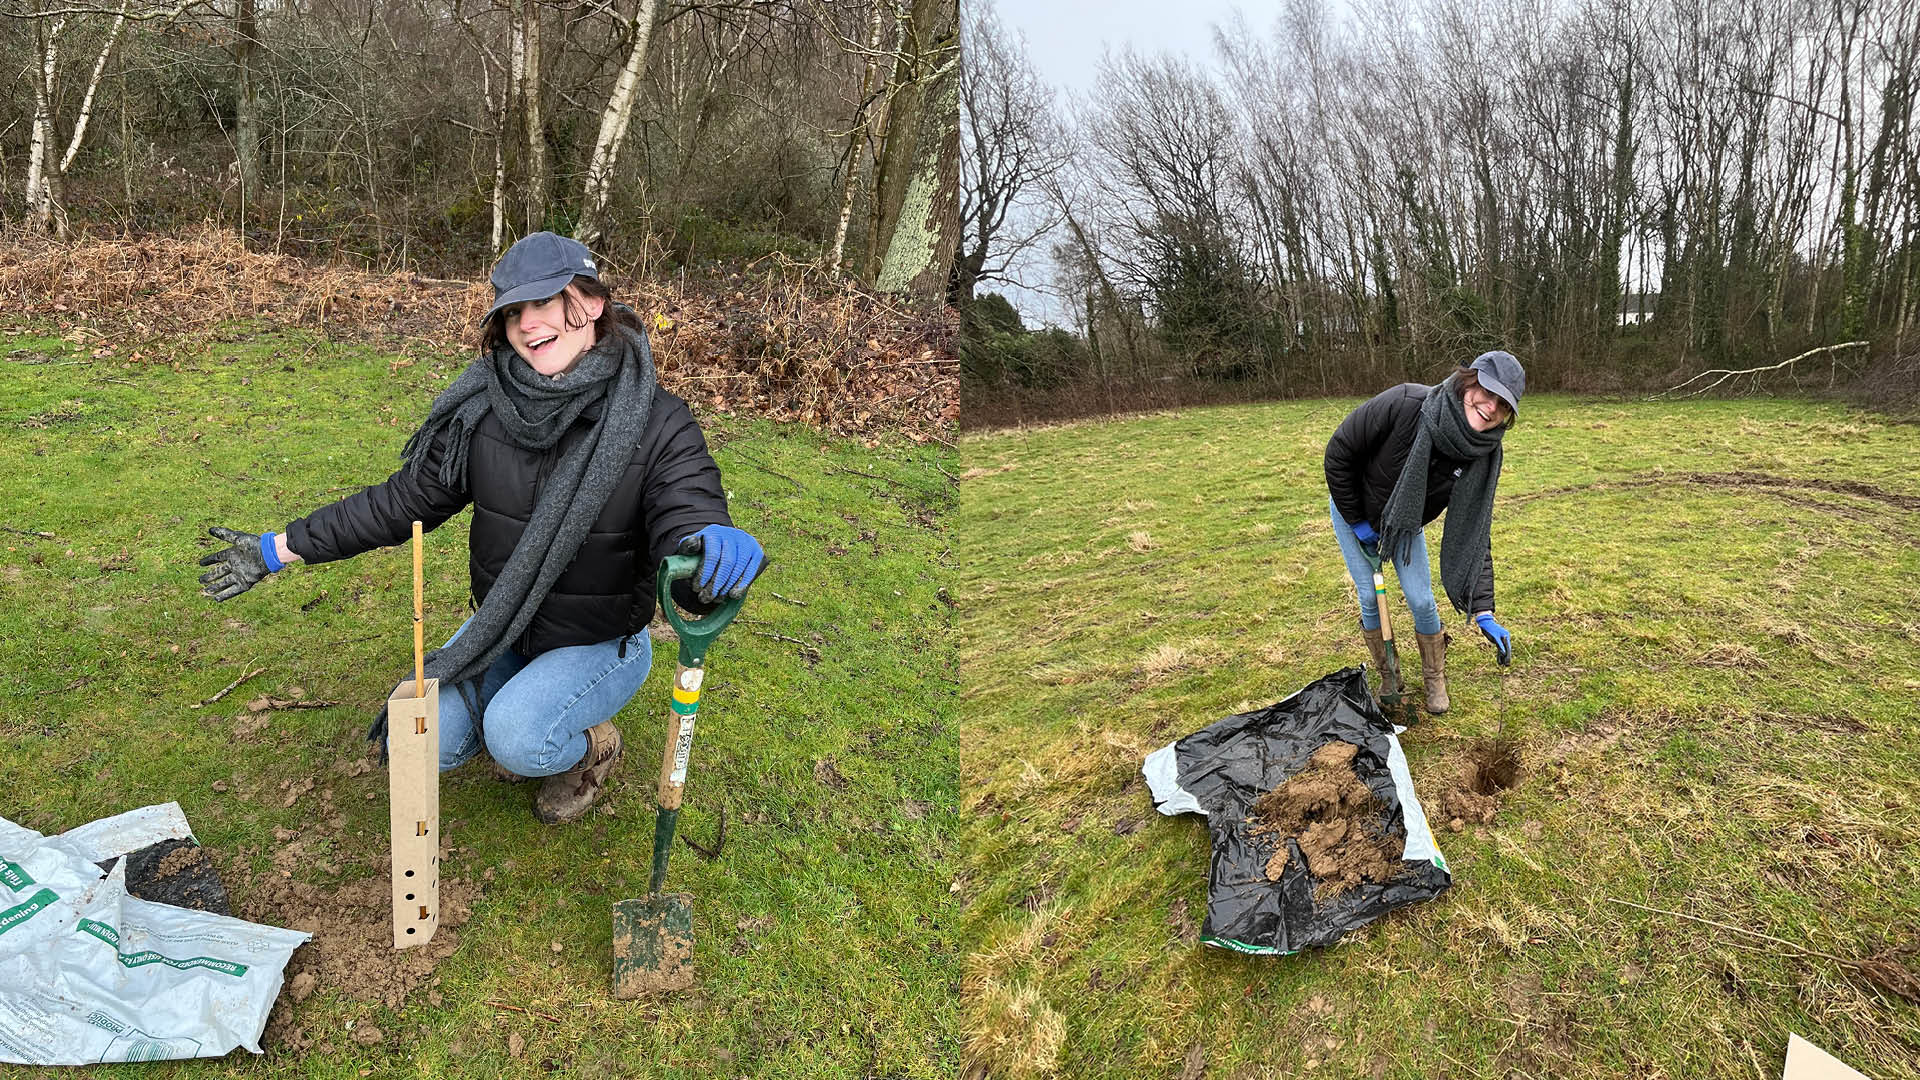 Two images on a woman in a black coat holding a shovel as she plants a tree